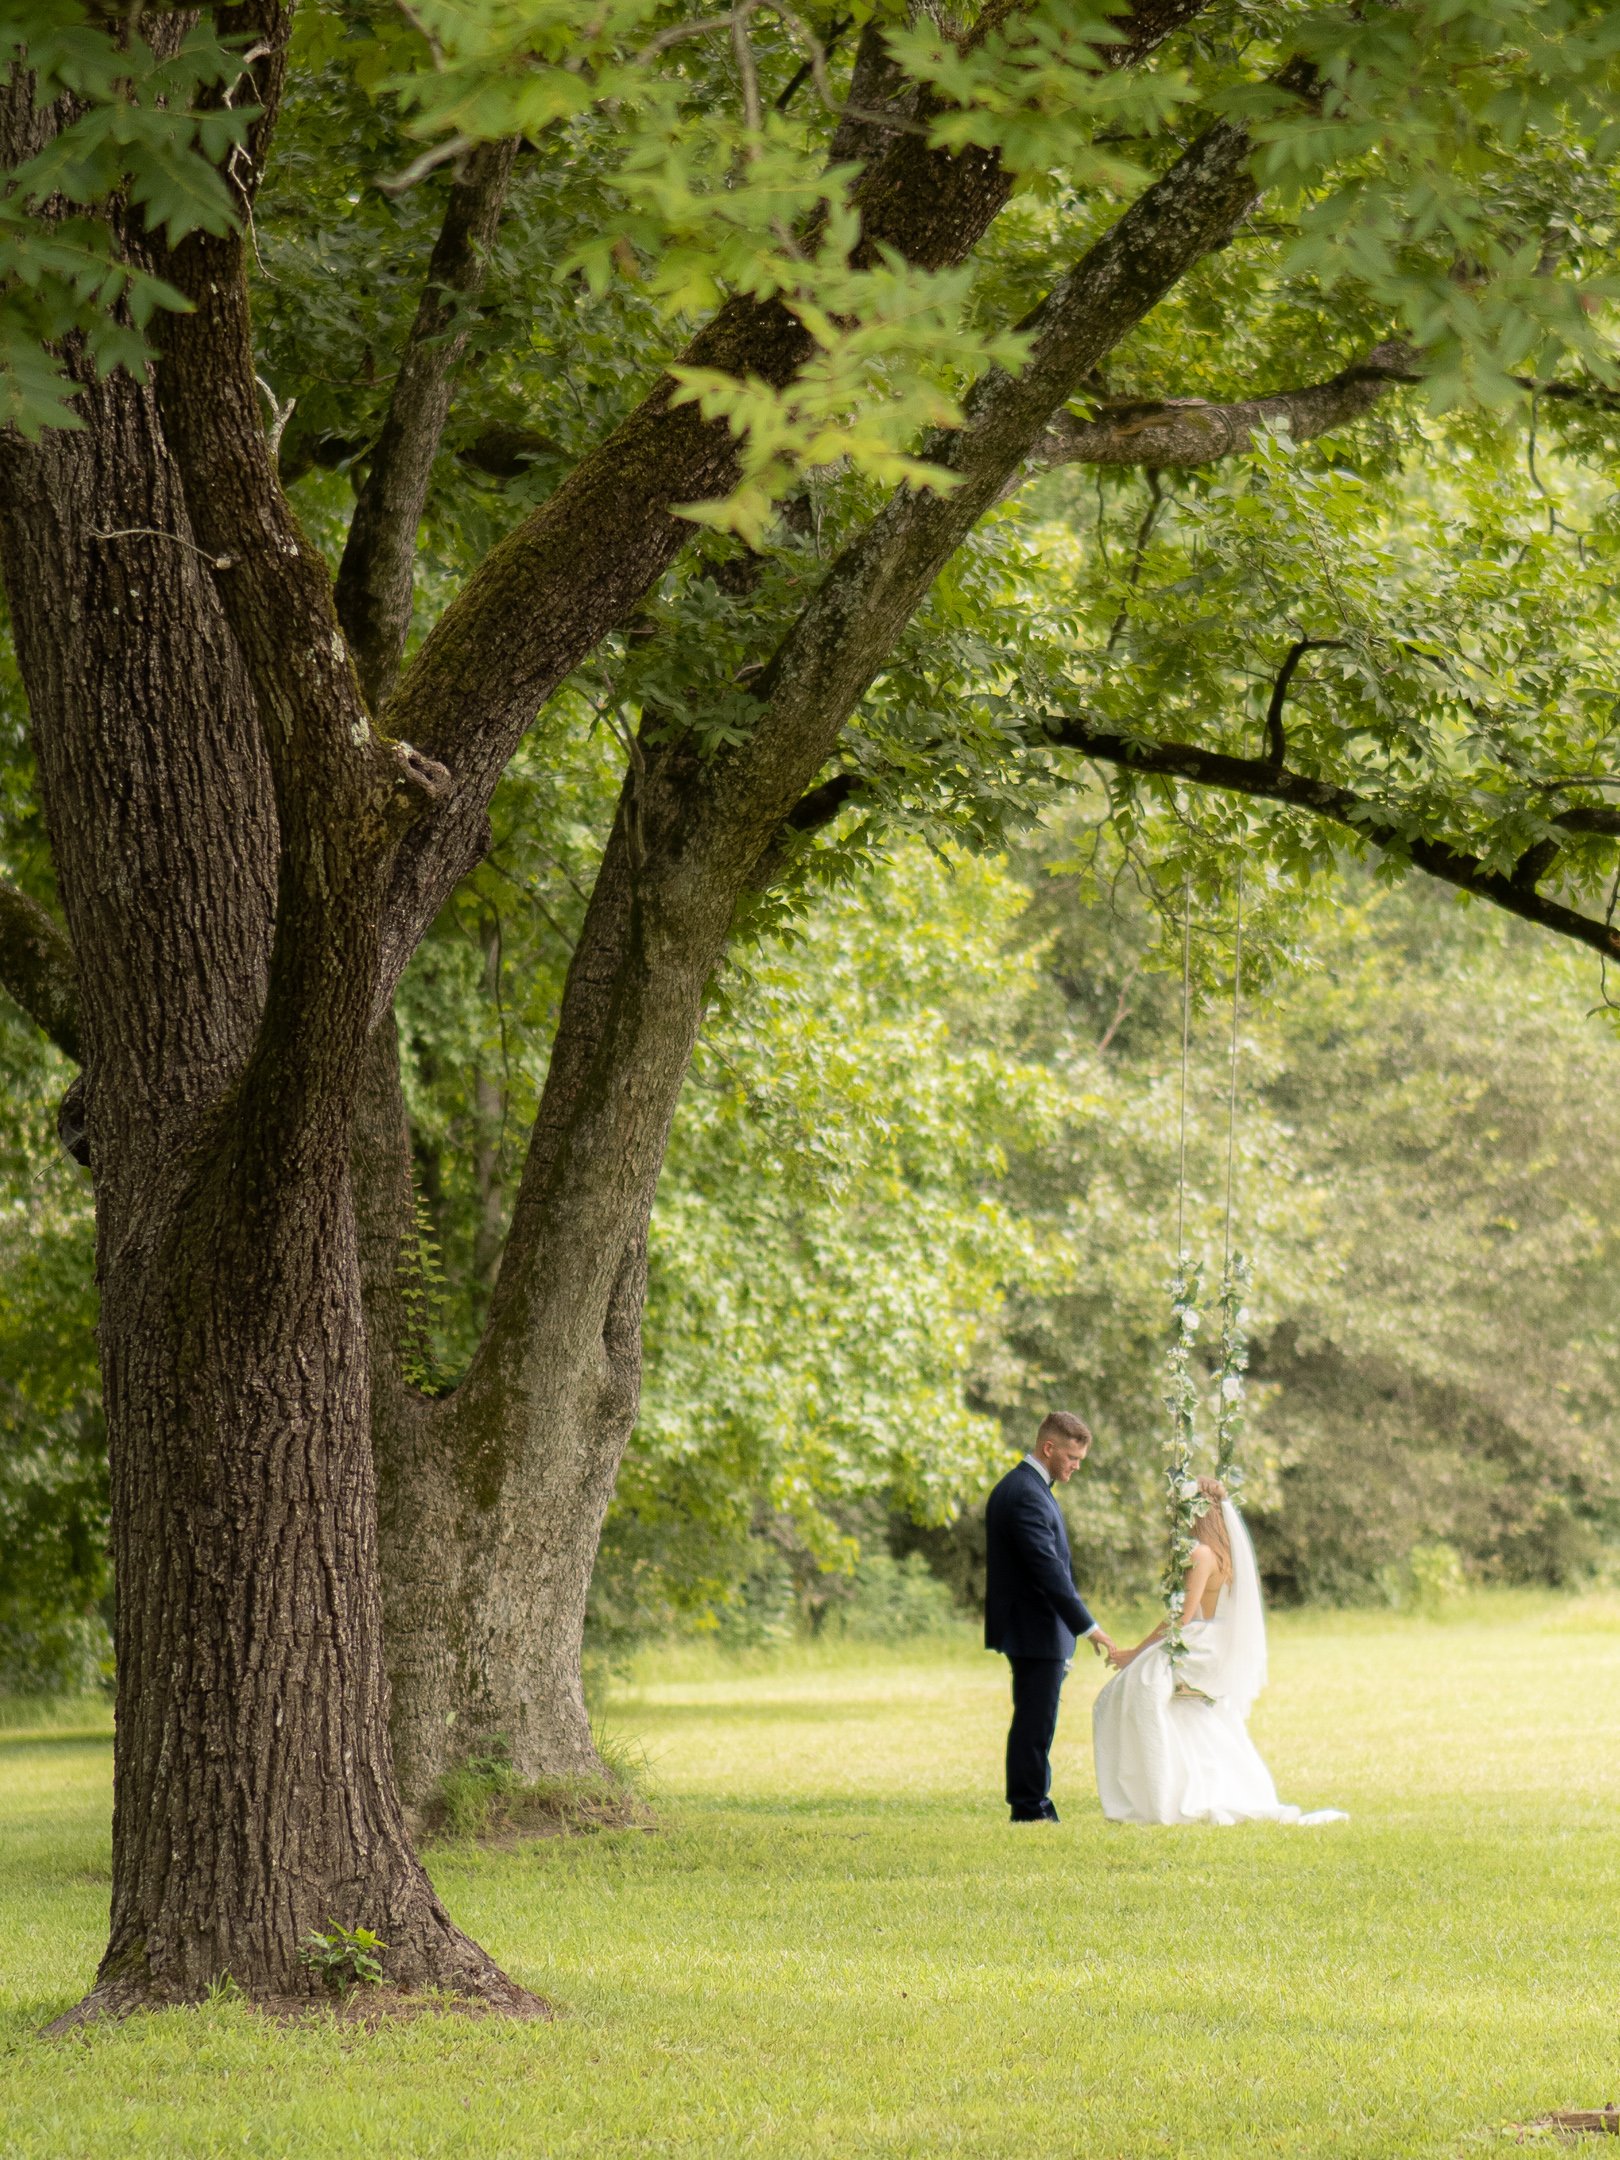 Bridal-Couple-Tree-Swing-In-The-Distance.jpeg